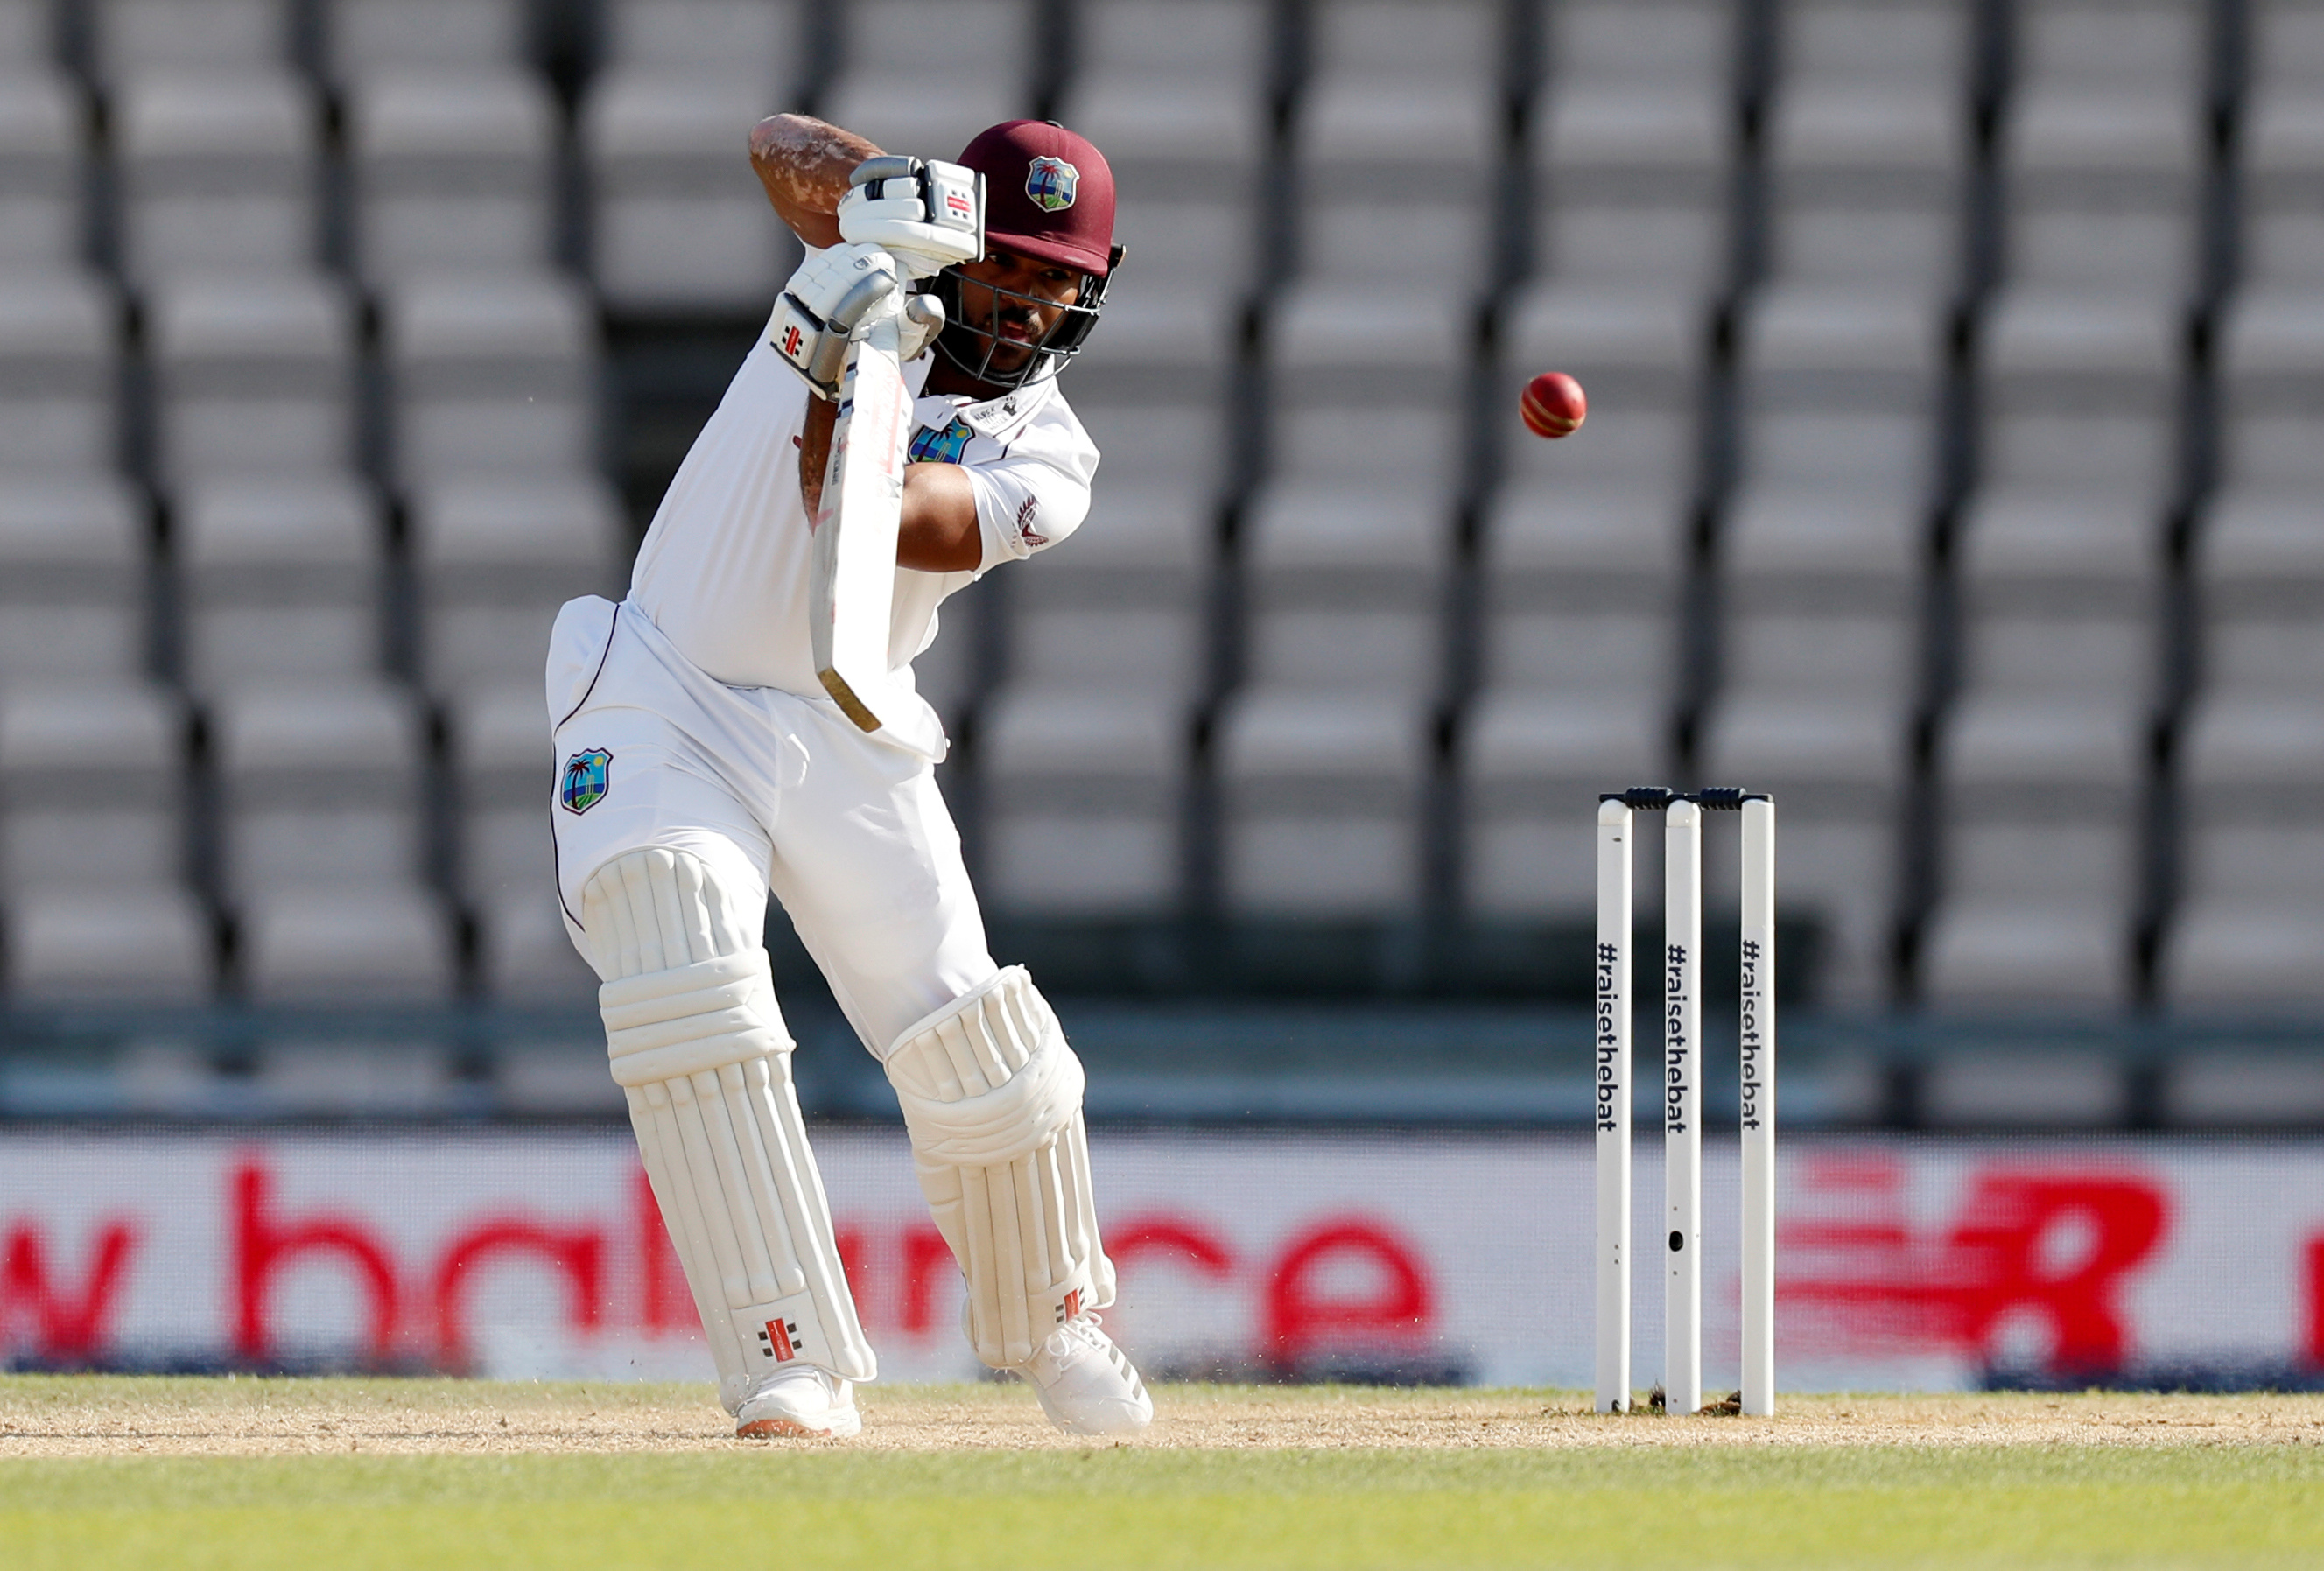 West Indies' John Campbell in action. Photo: Reuters